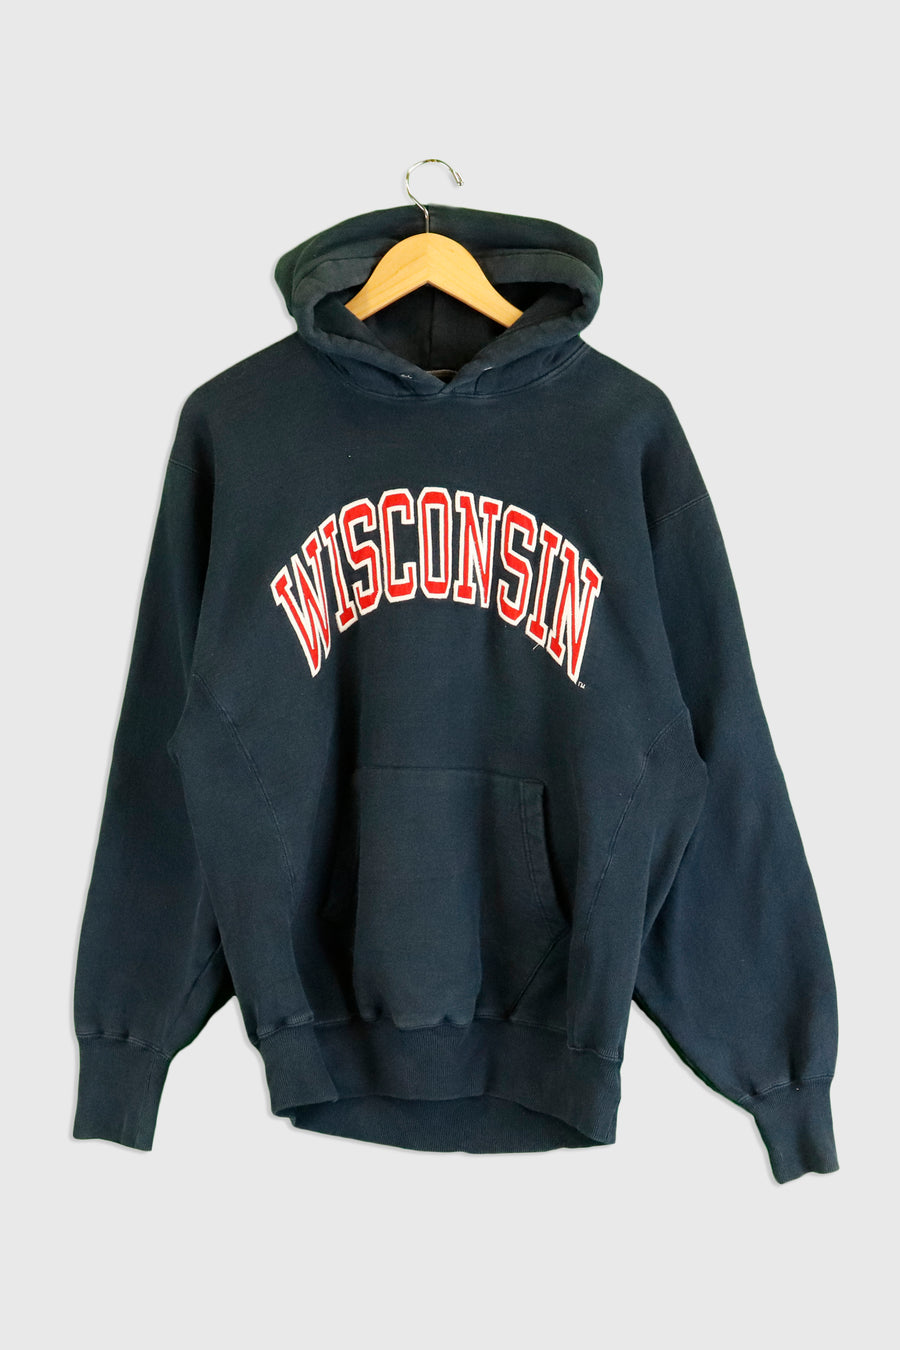 Vintage Wisconsin Embroider Patched Hoodie Sz L